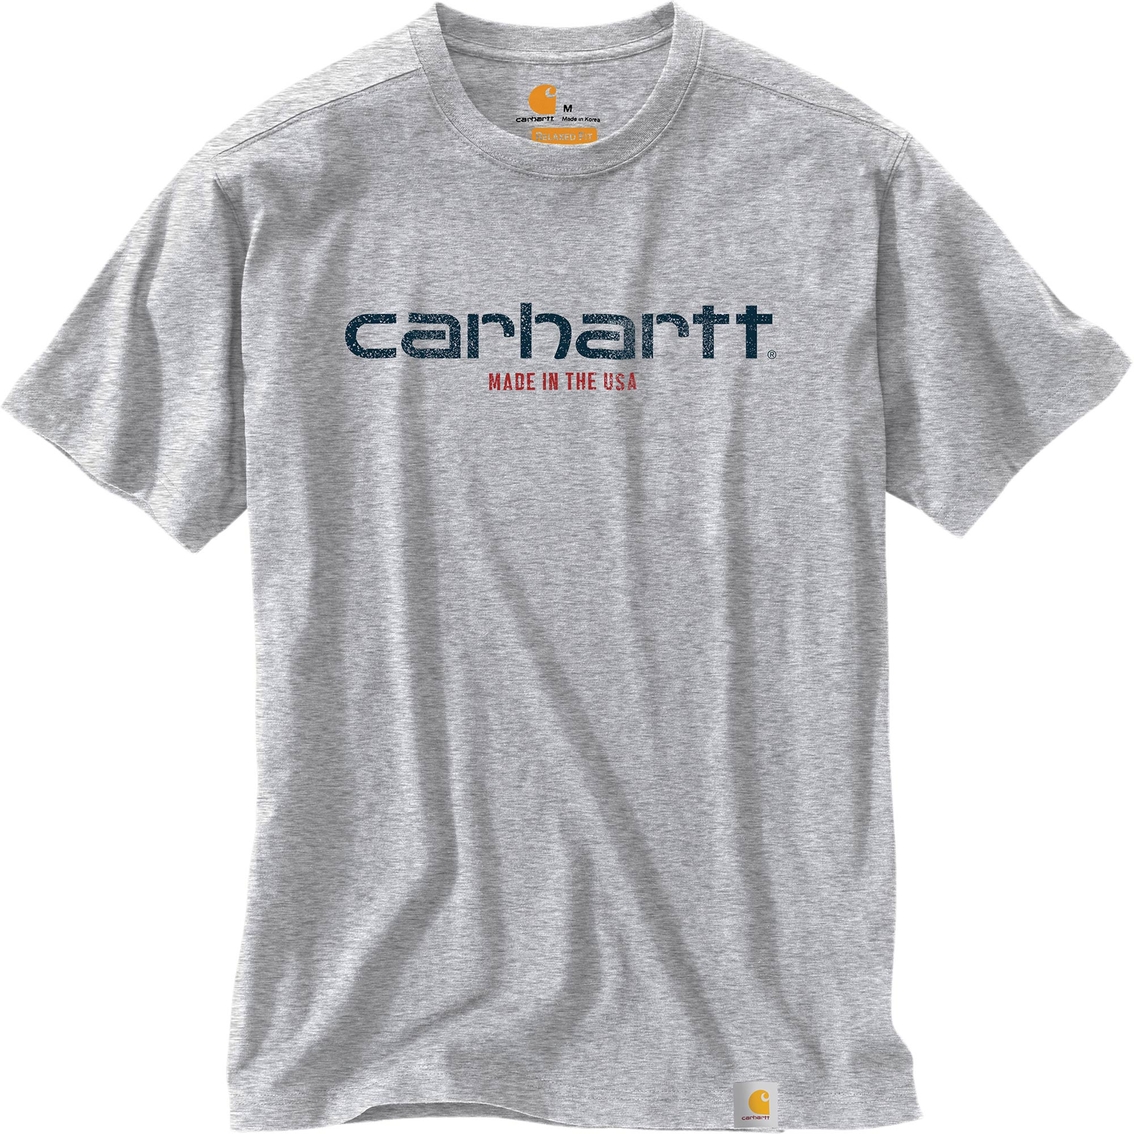 Carhartt Graphic Made In Usa Tee | Shirts | Clothing & Accessories ...